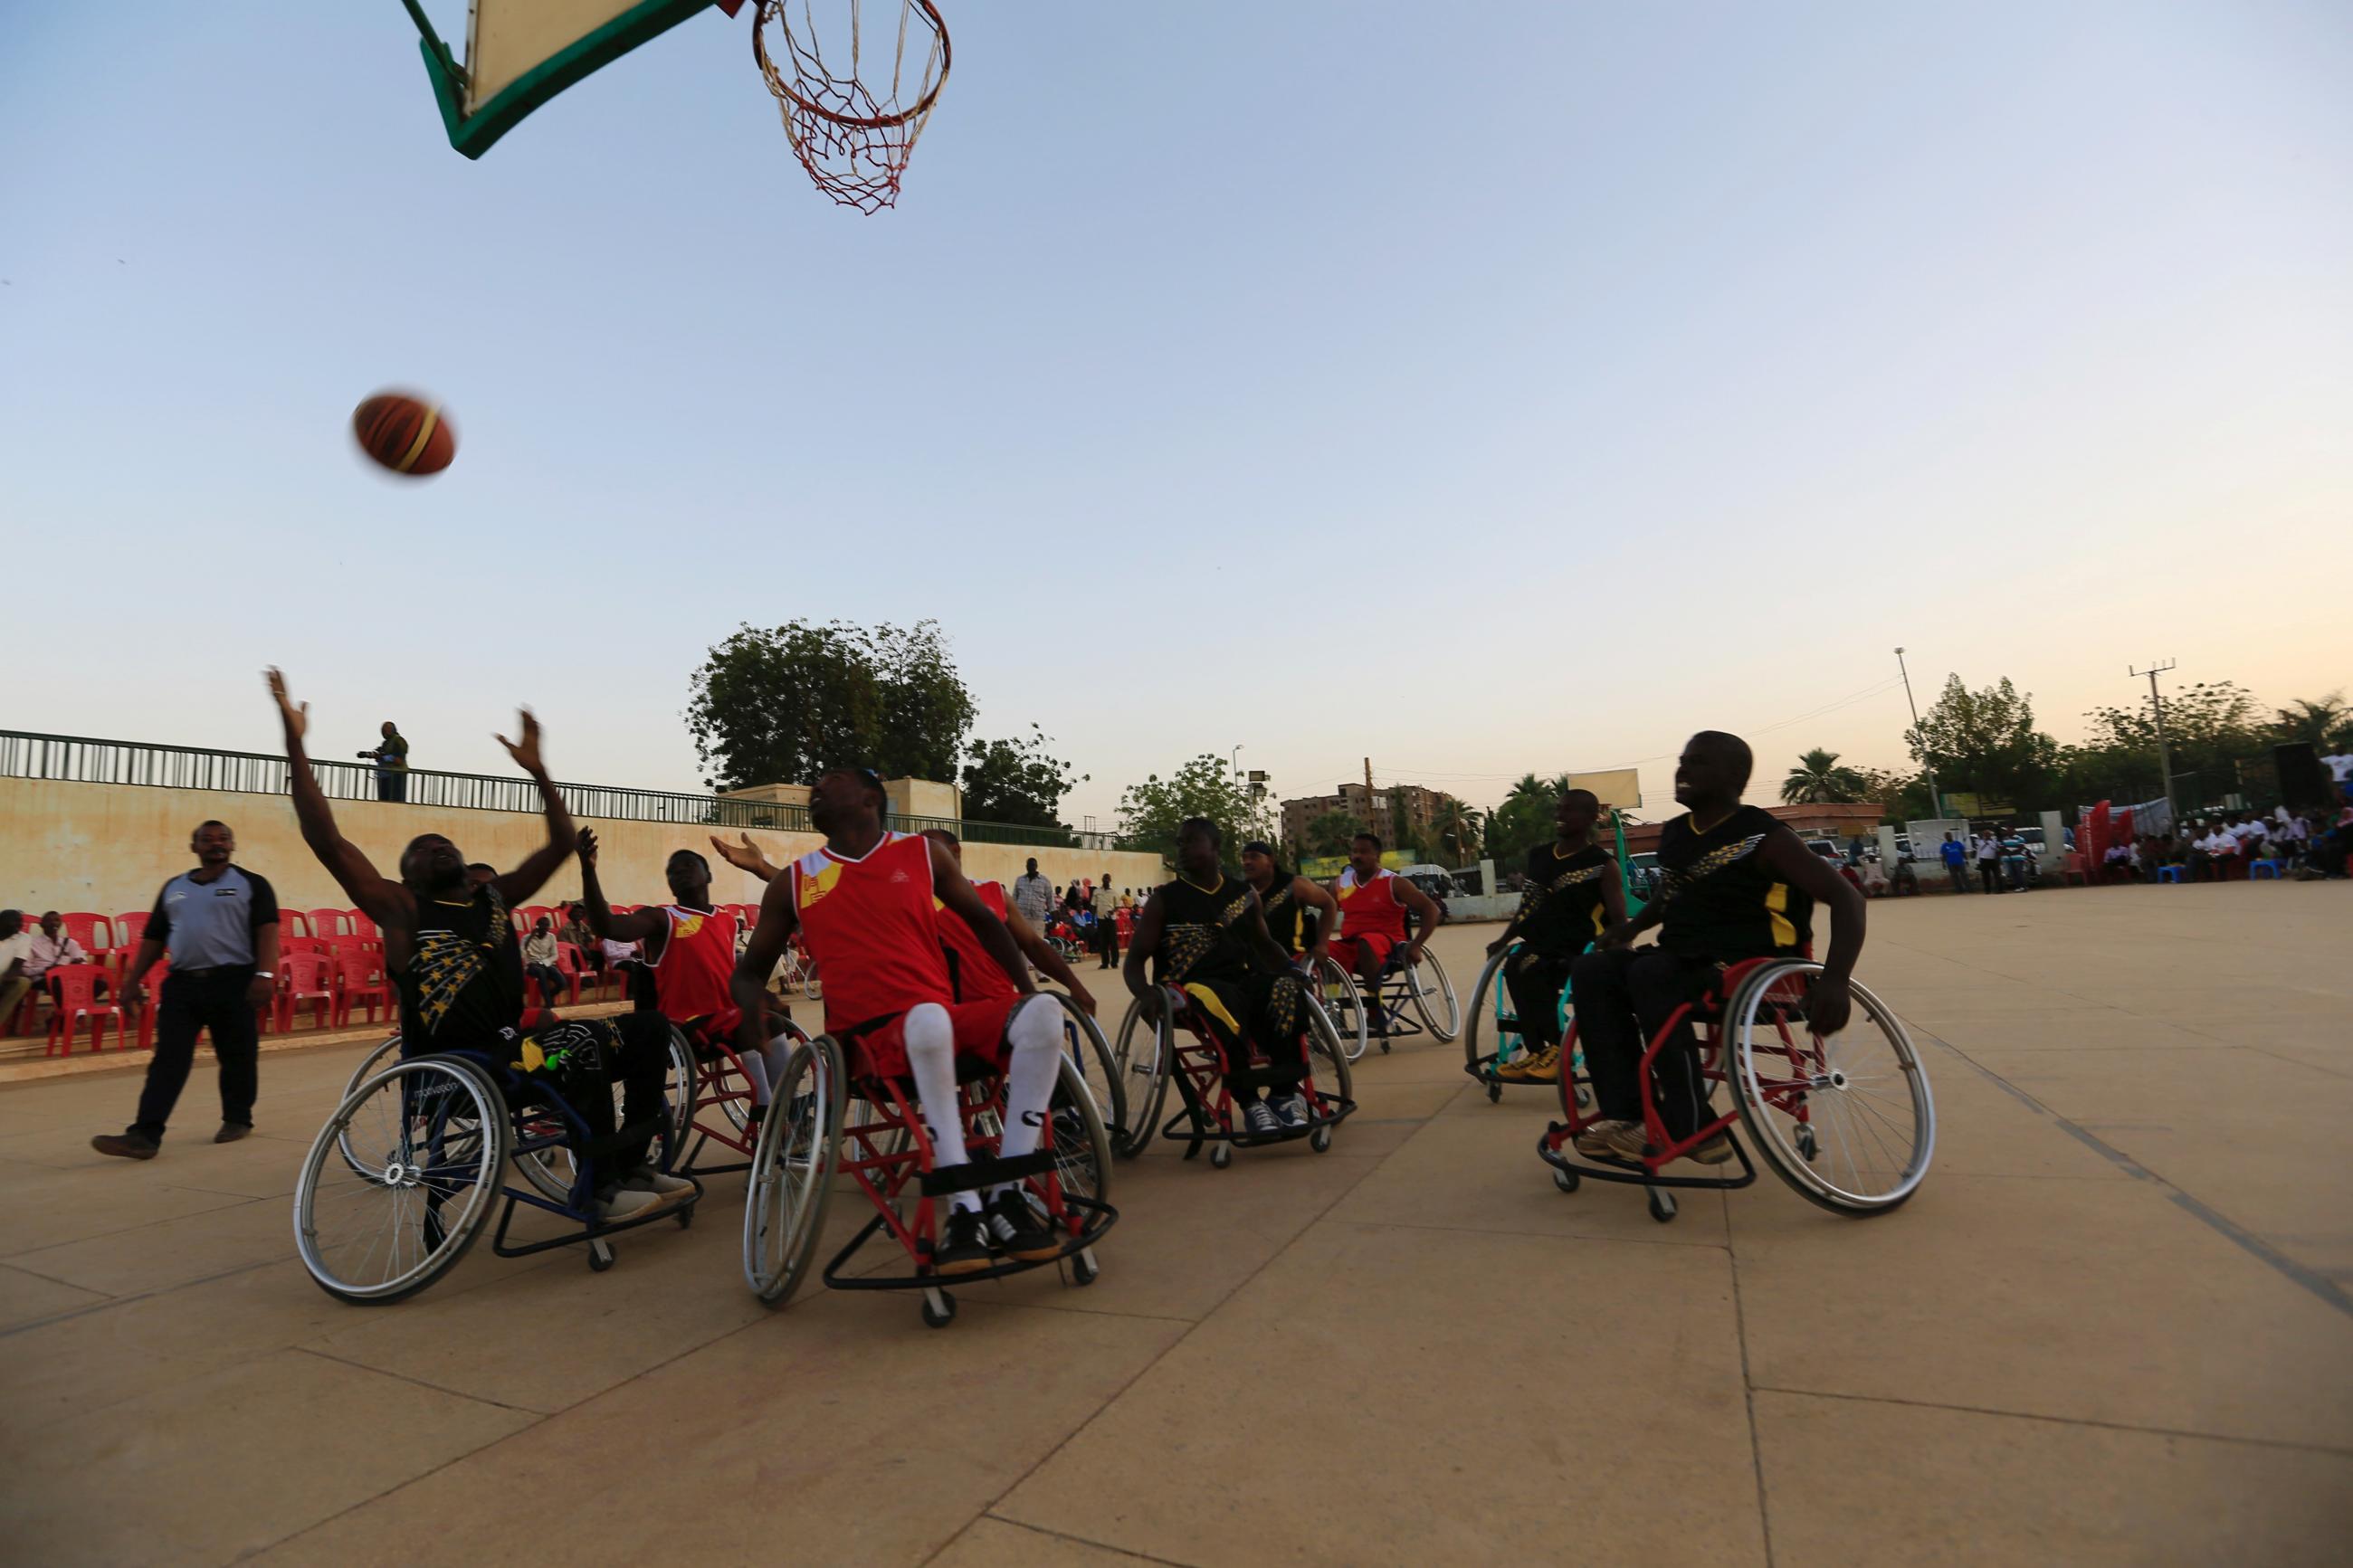 Two teams, one in red jerseys, the other in black jerseys, face off during the first wheelchair basketball tournament in Sudan, marking the International Day of Persons with Disabilities at dusk. 